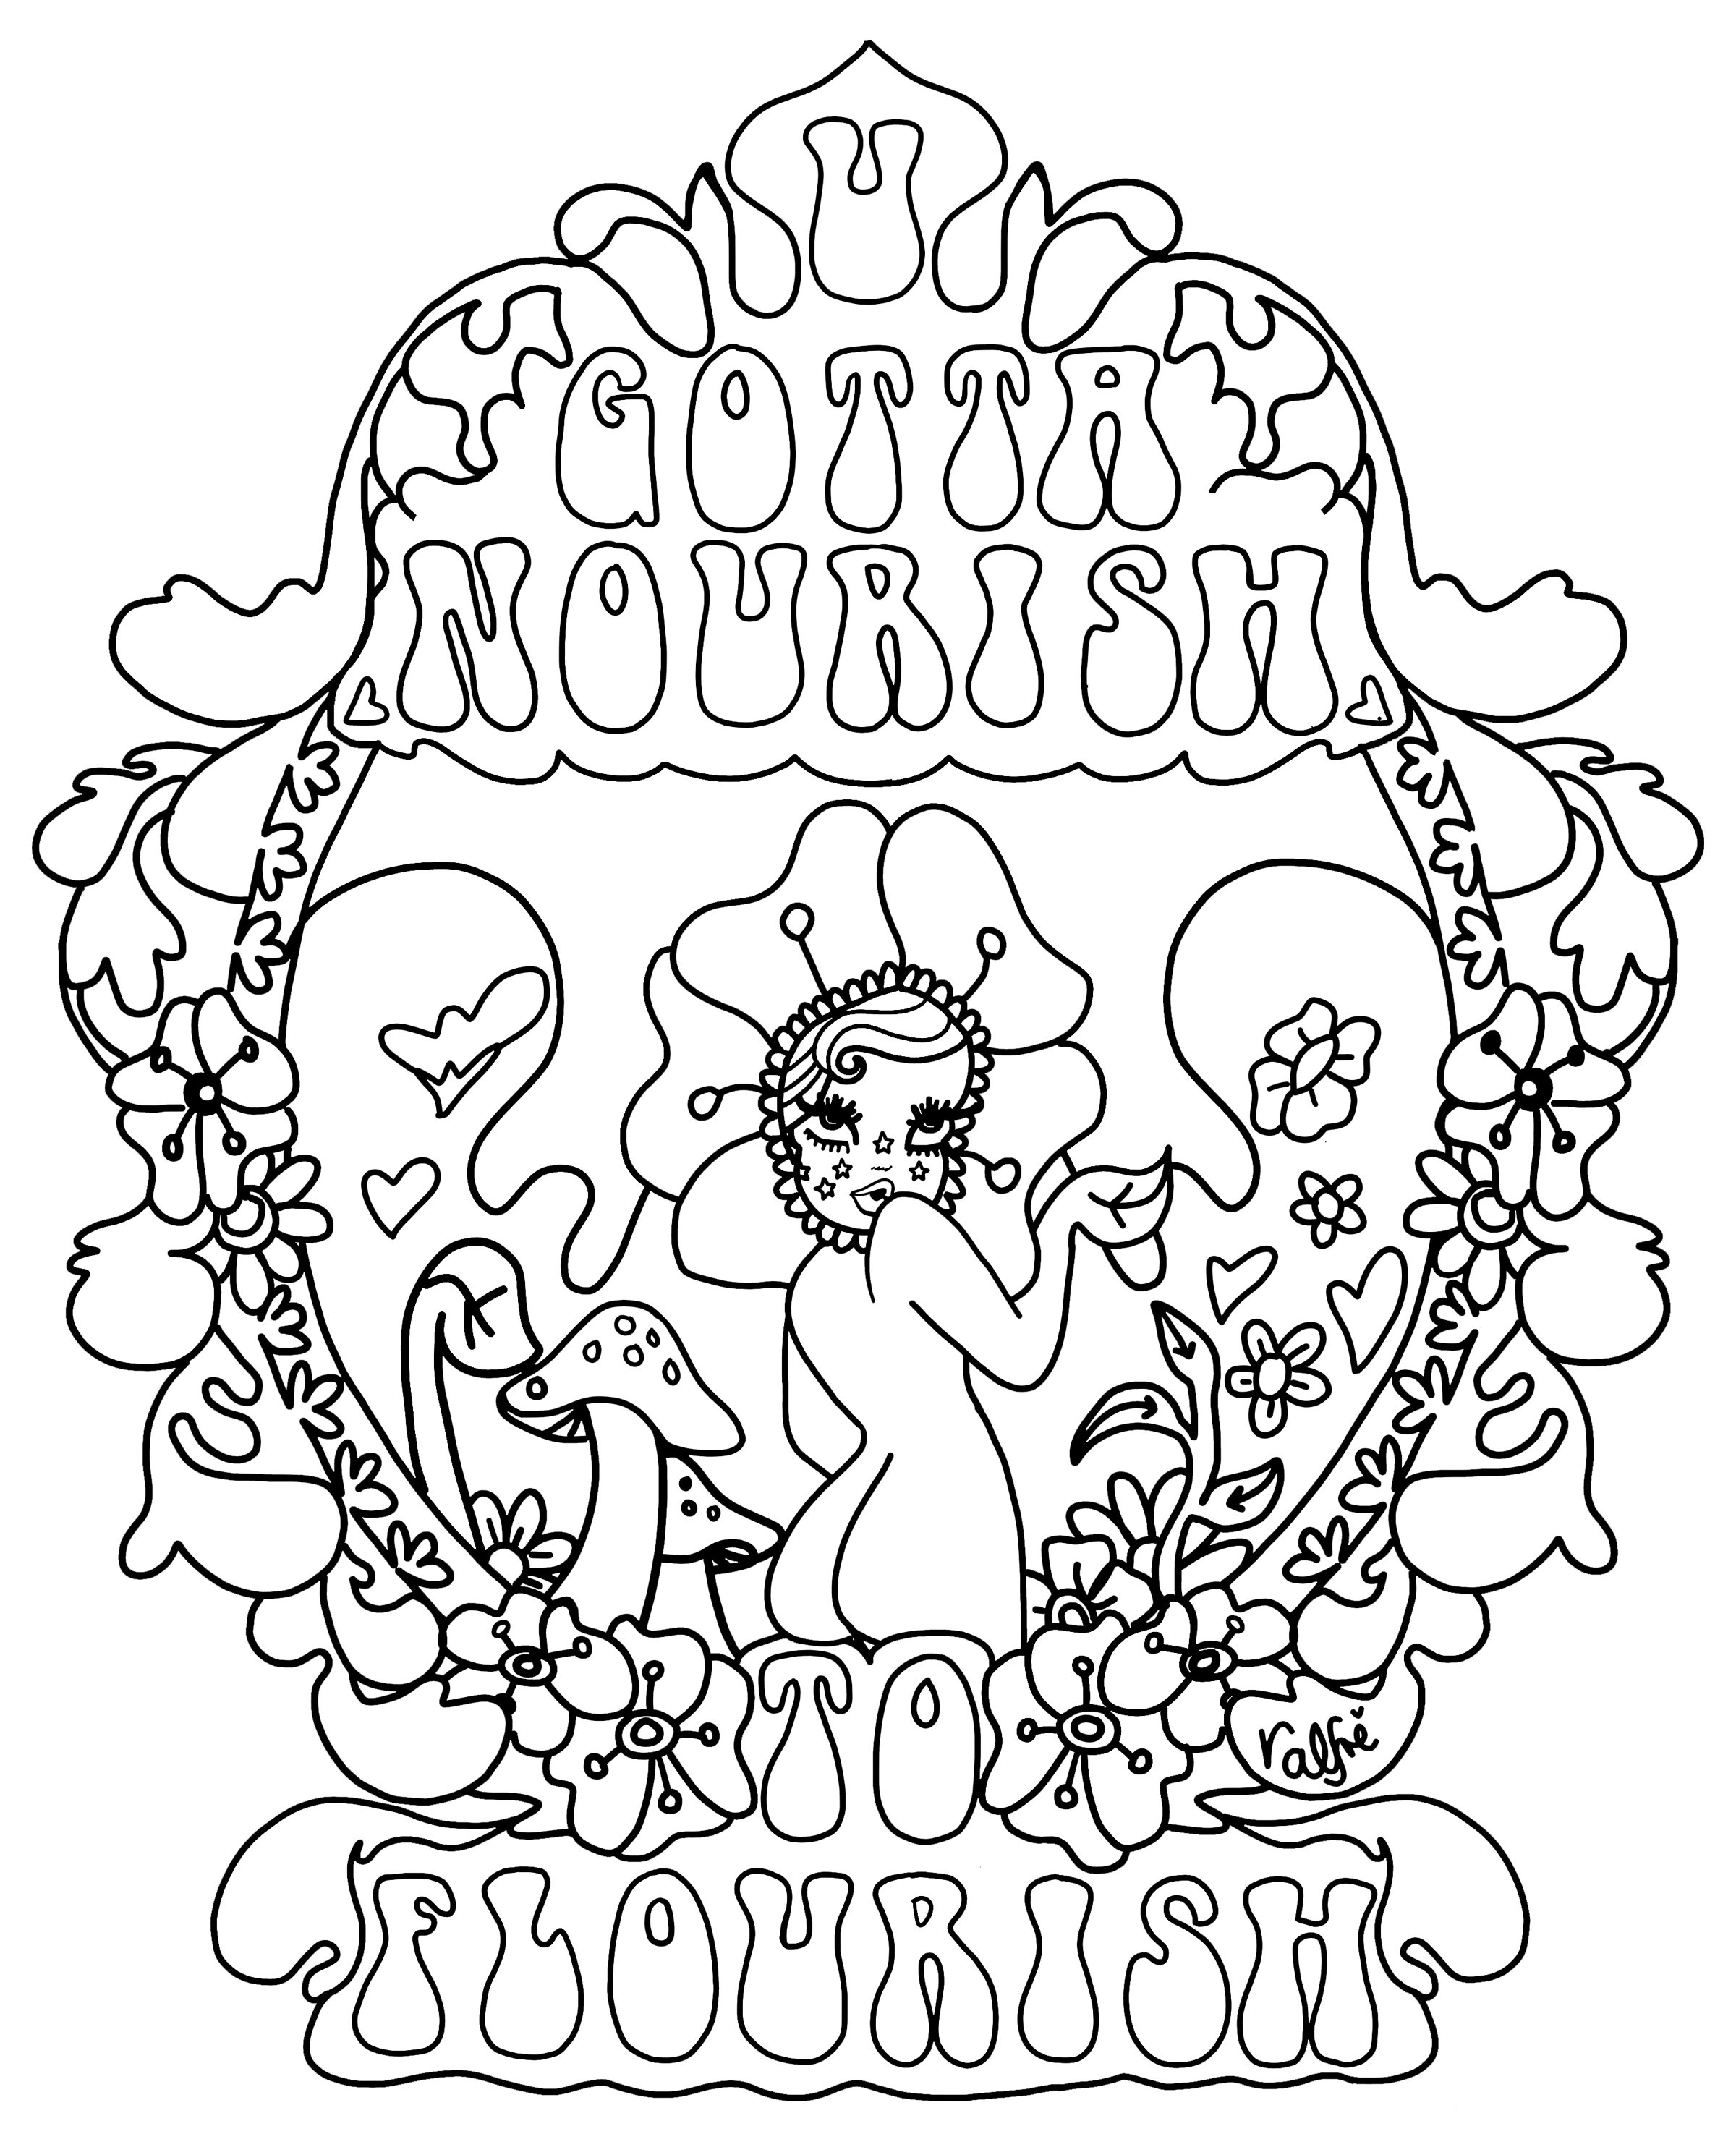 Funny Weed Coloring Pages Coloring Pages